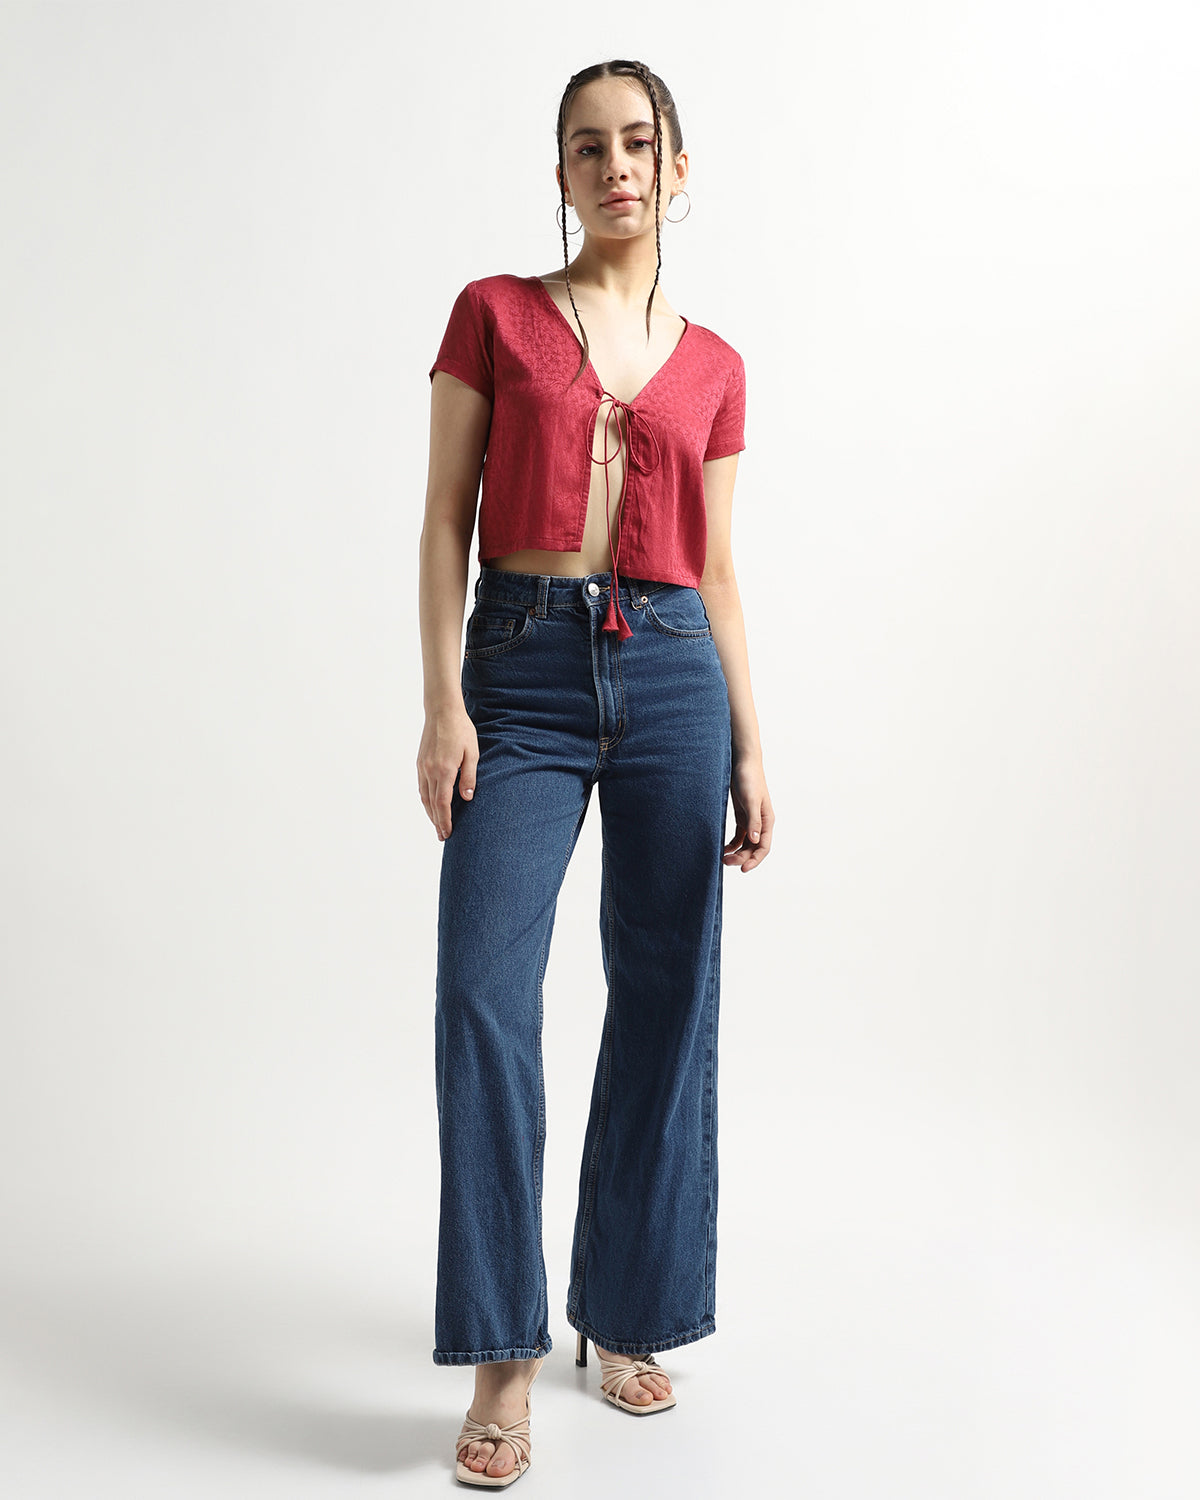 Sustainable Chic Red Cap Sleeves String Tie-Up Top